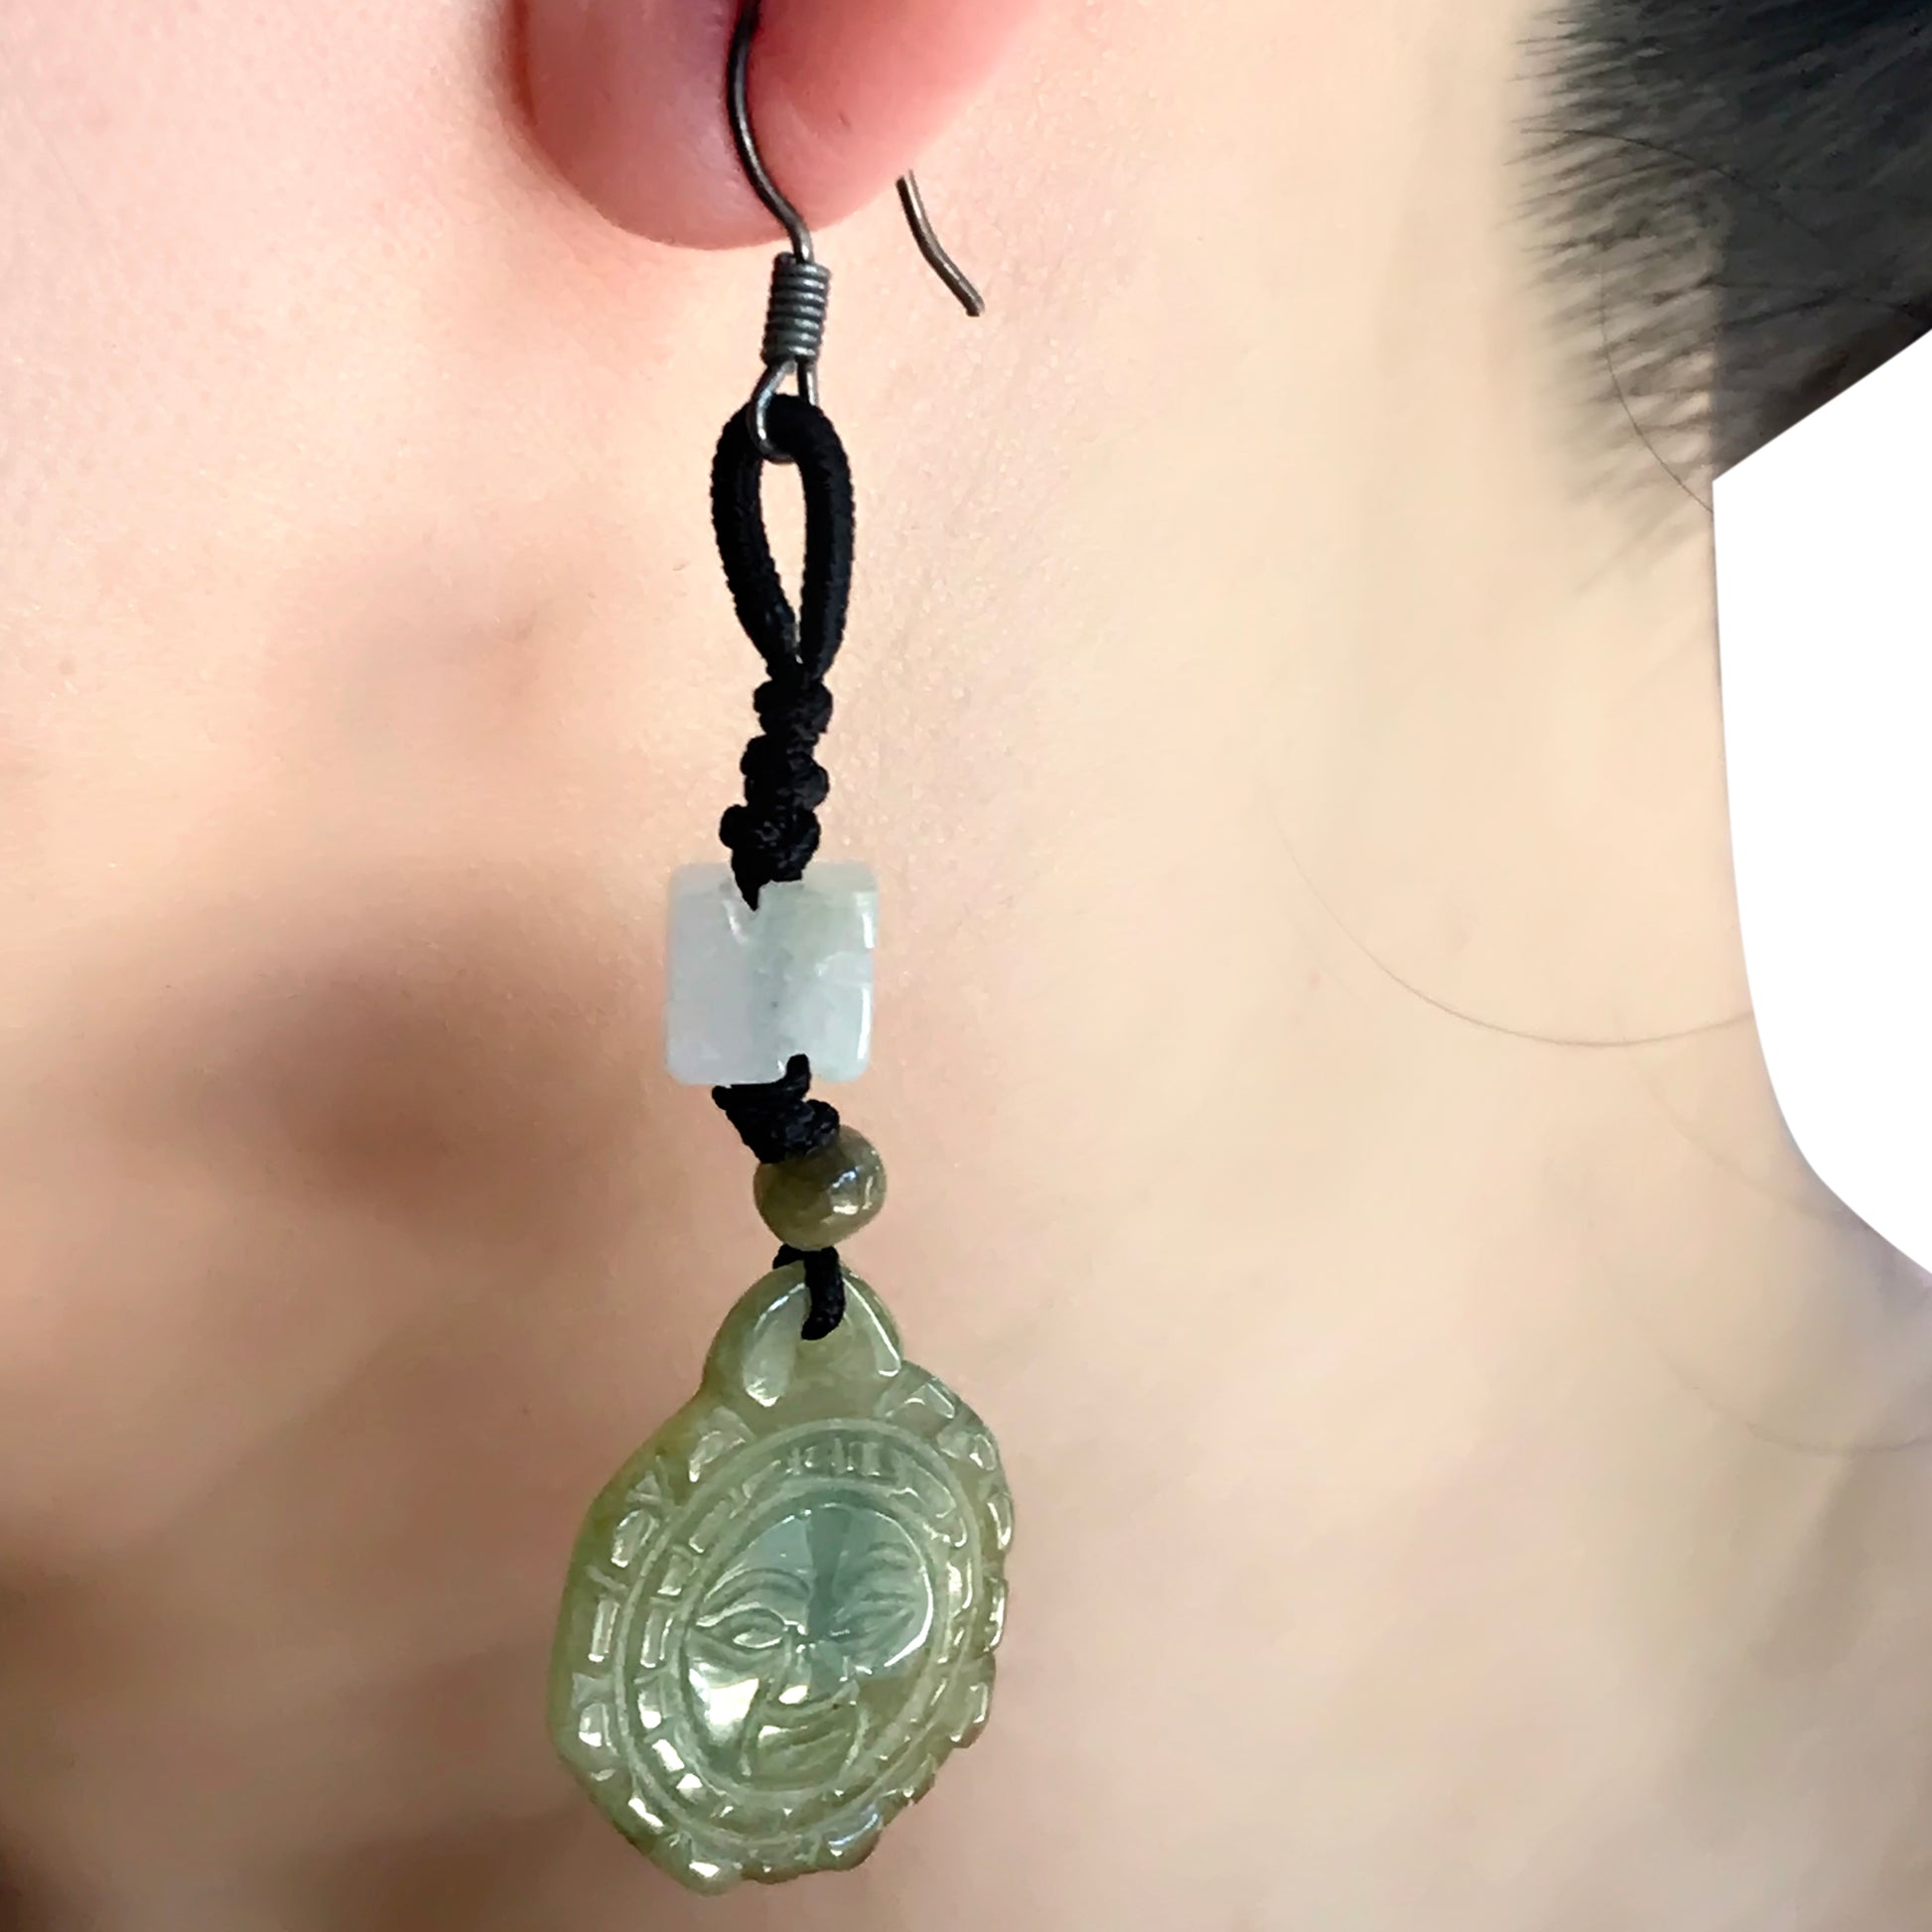 The Perfect Accessory: Get the One and Only Sun Handmade Jade Earrings